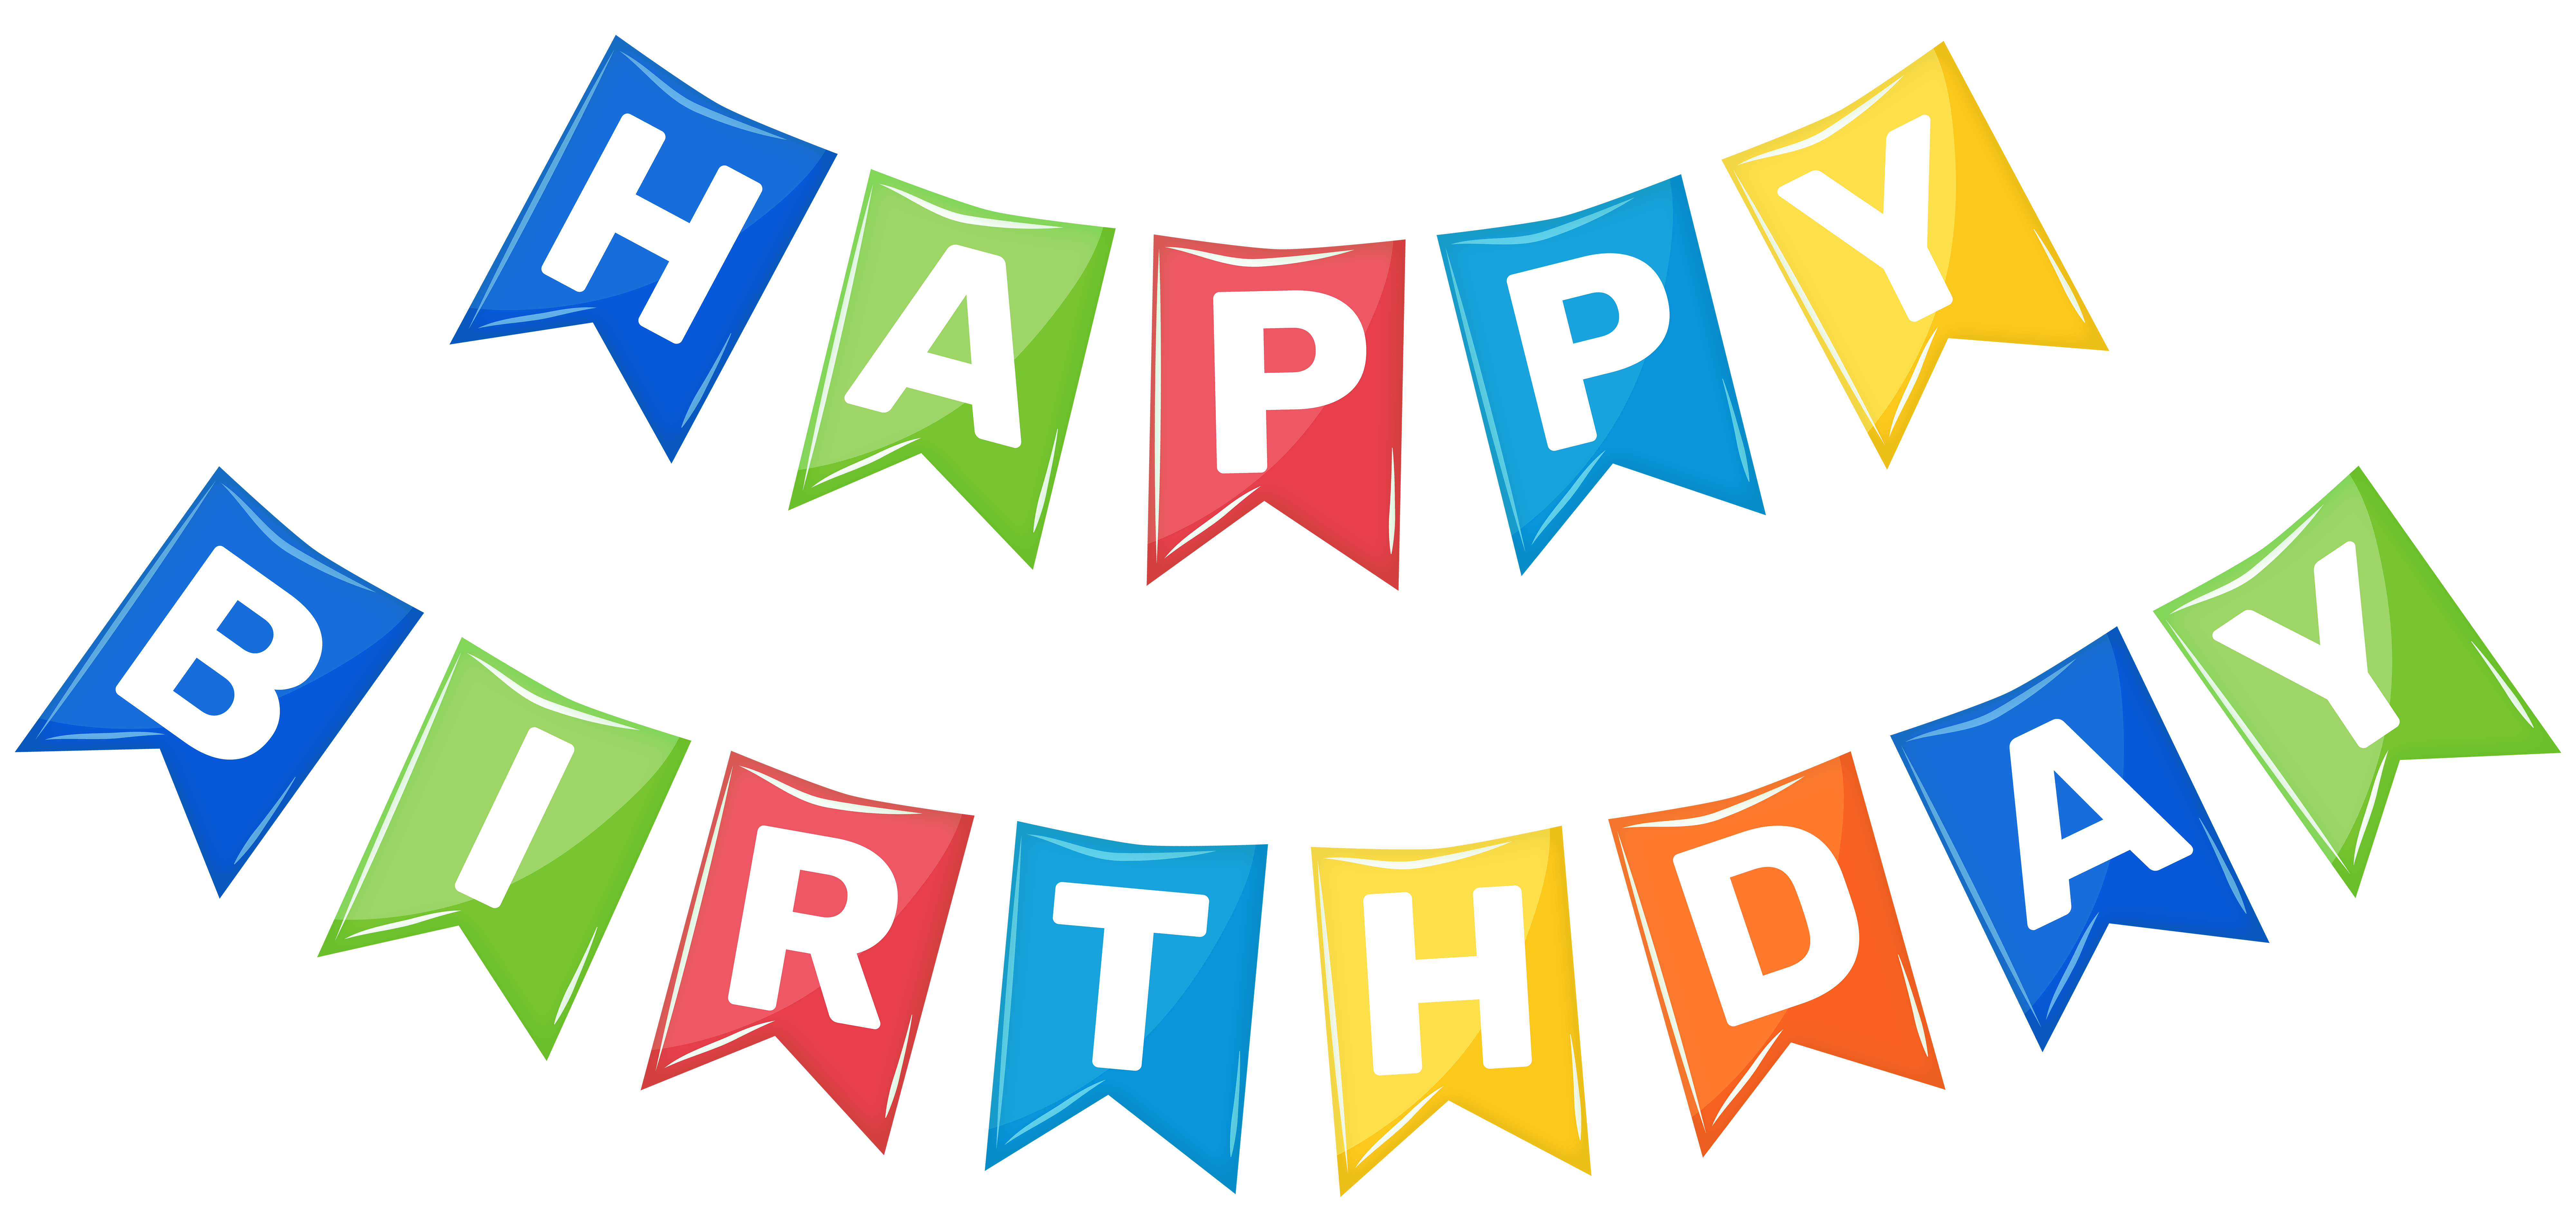 Birthday Streamer Vector Hd PNG Images, Happy Birthday Streamers Fall,  Streamers Fall, Happy Birthday, Happy PNG Image For Free Download